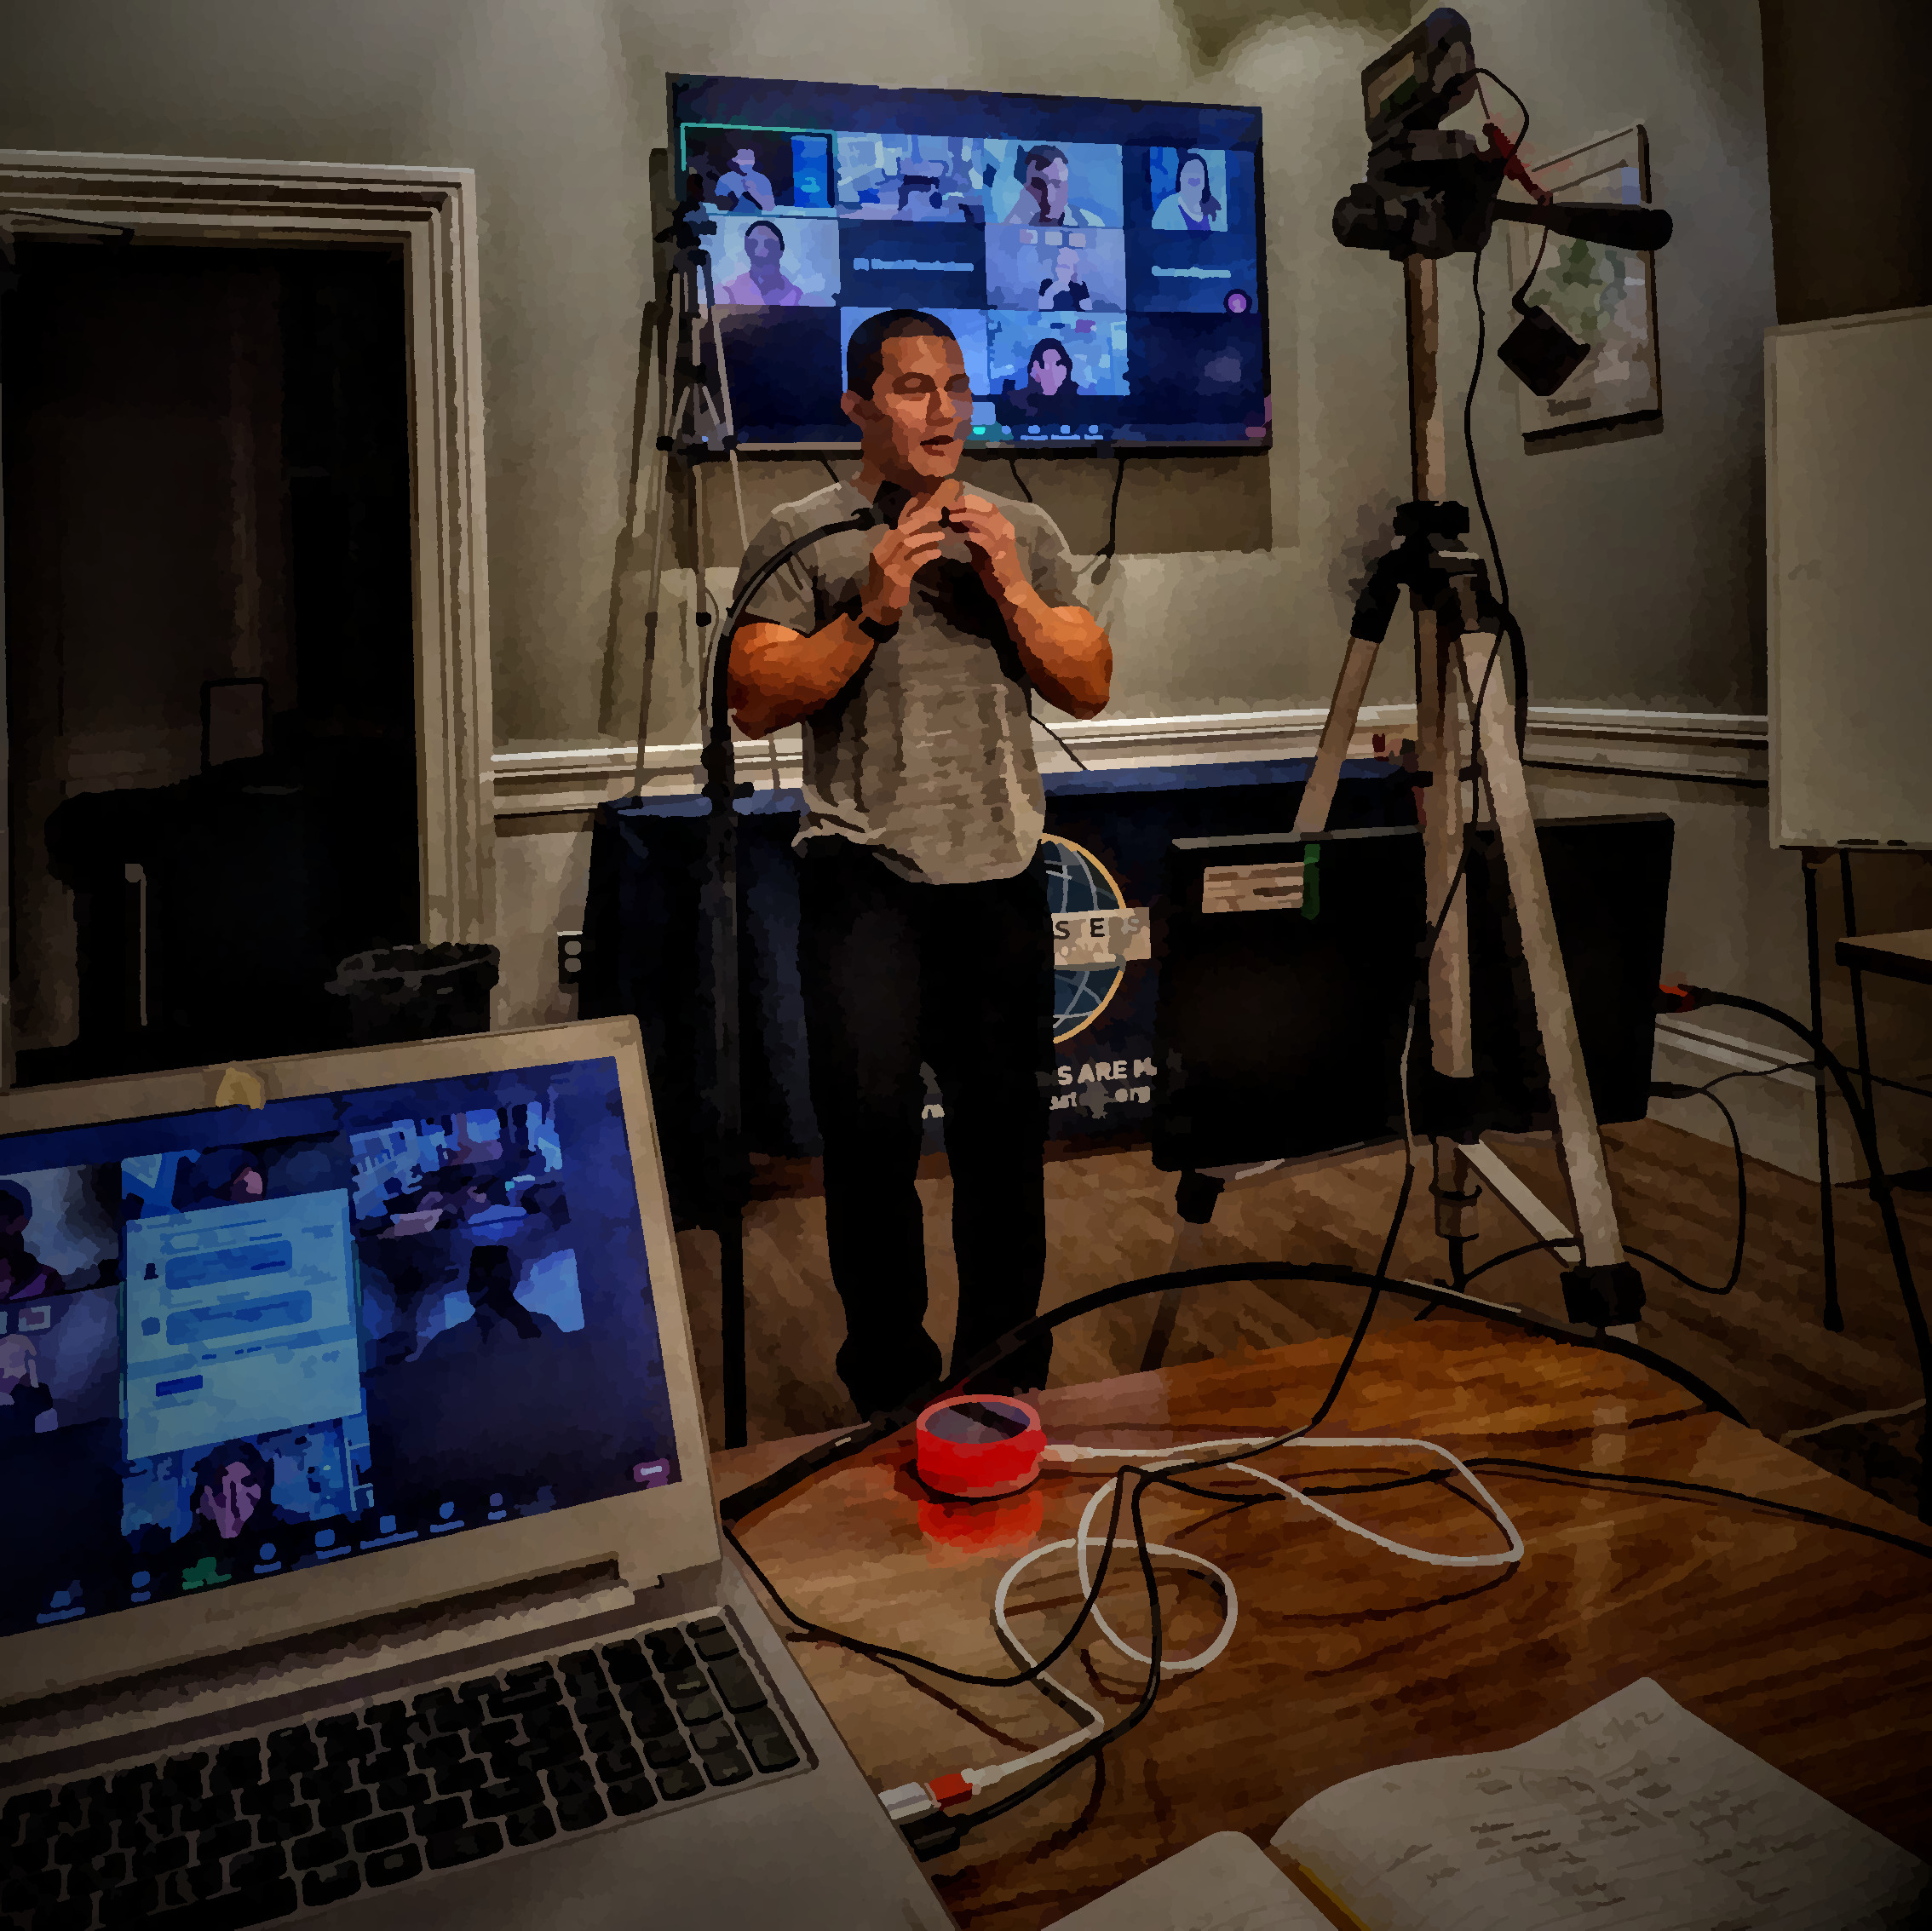 A man stands in front of a camera, with his hands gesturing in a triangle that points towards his face. In the background, we see a gallery of Zoom participants and in the foreground we see a camera and a laptop with the Zoom meeting running. A red "on-air" light glows on the table next to the laptop.